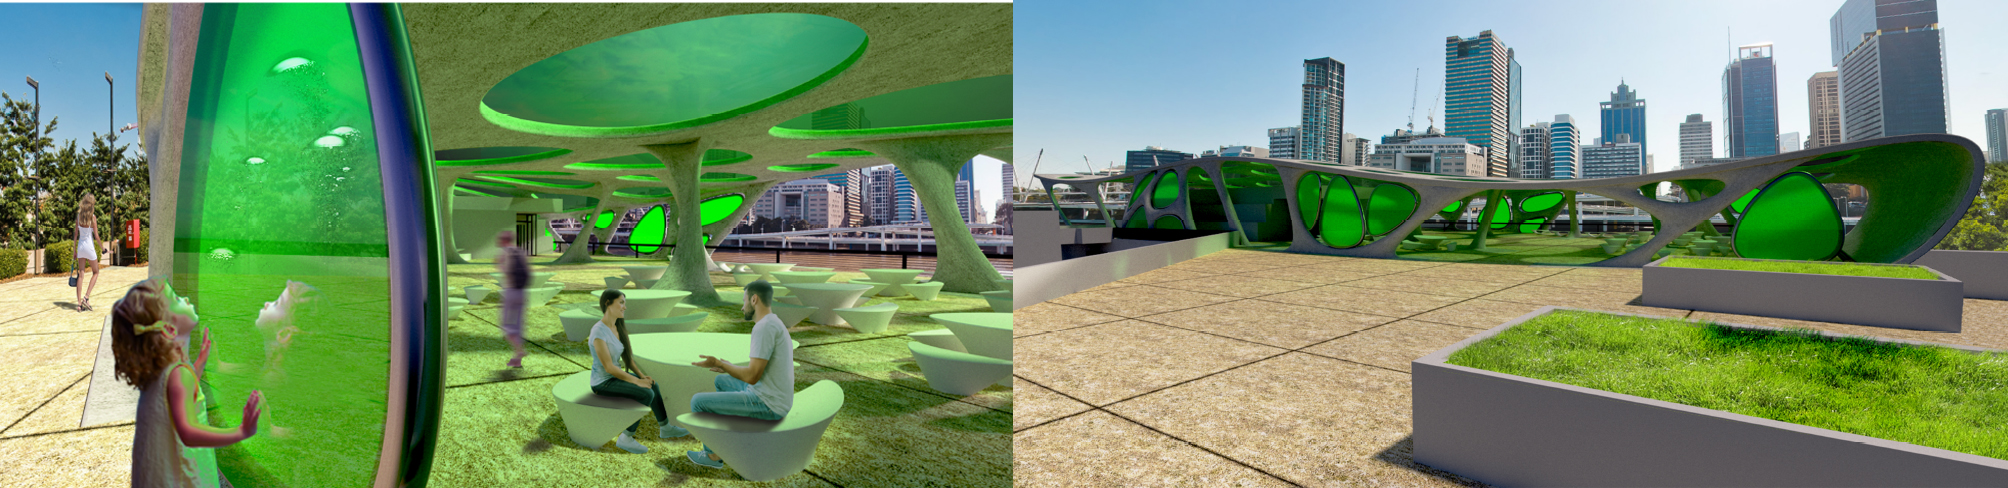 Renderings of the rooftop terrace area with the algae PBR.